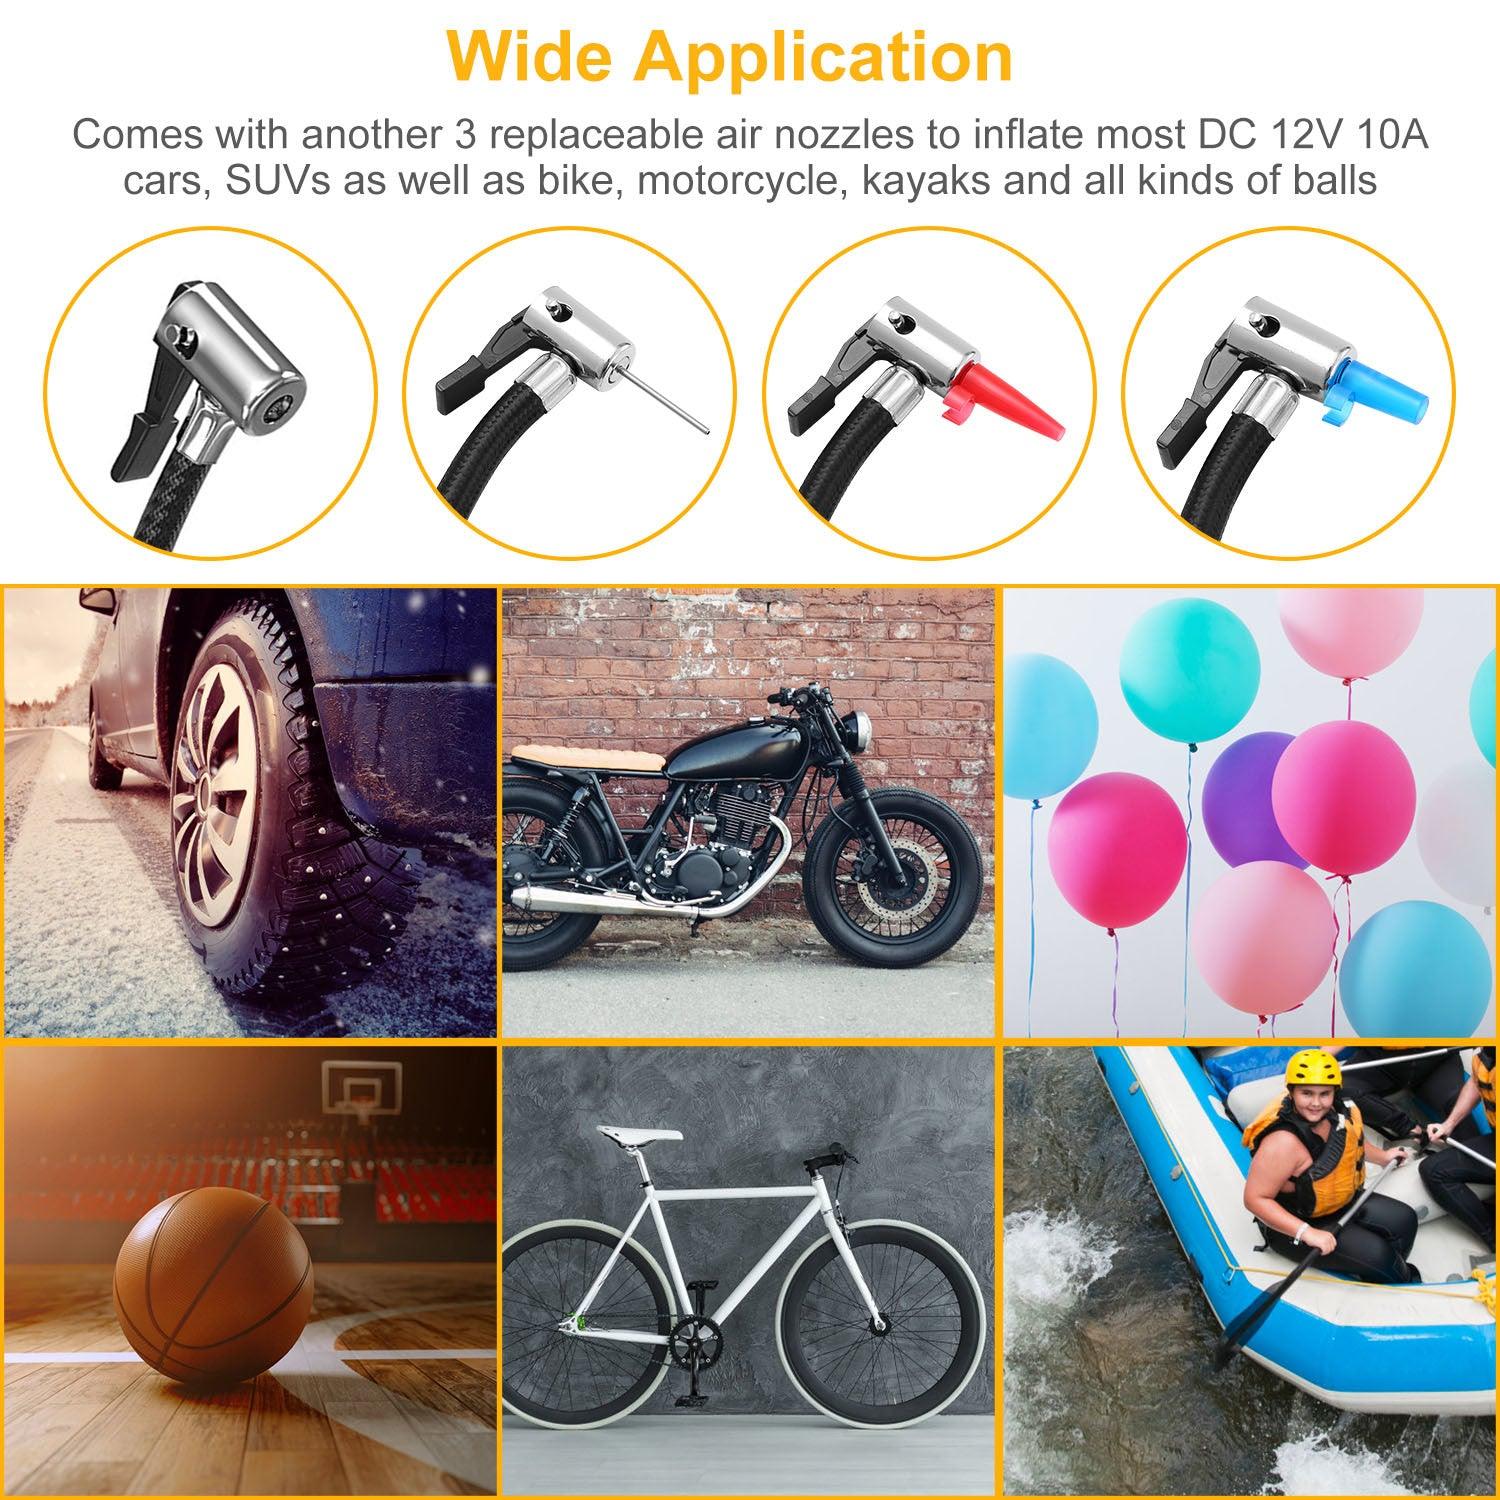 LazyPro CT3 Car Tire Air Pump Portable Air Compressor Pump DC 12V Car Tire Inflator Pump For Bicycle Motorcycle w/ Pointer - Lazy Pro